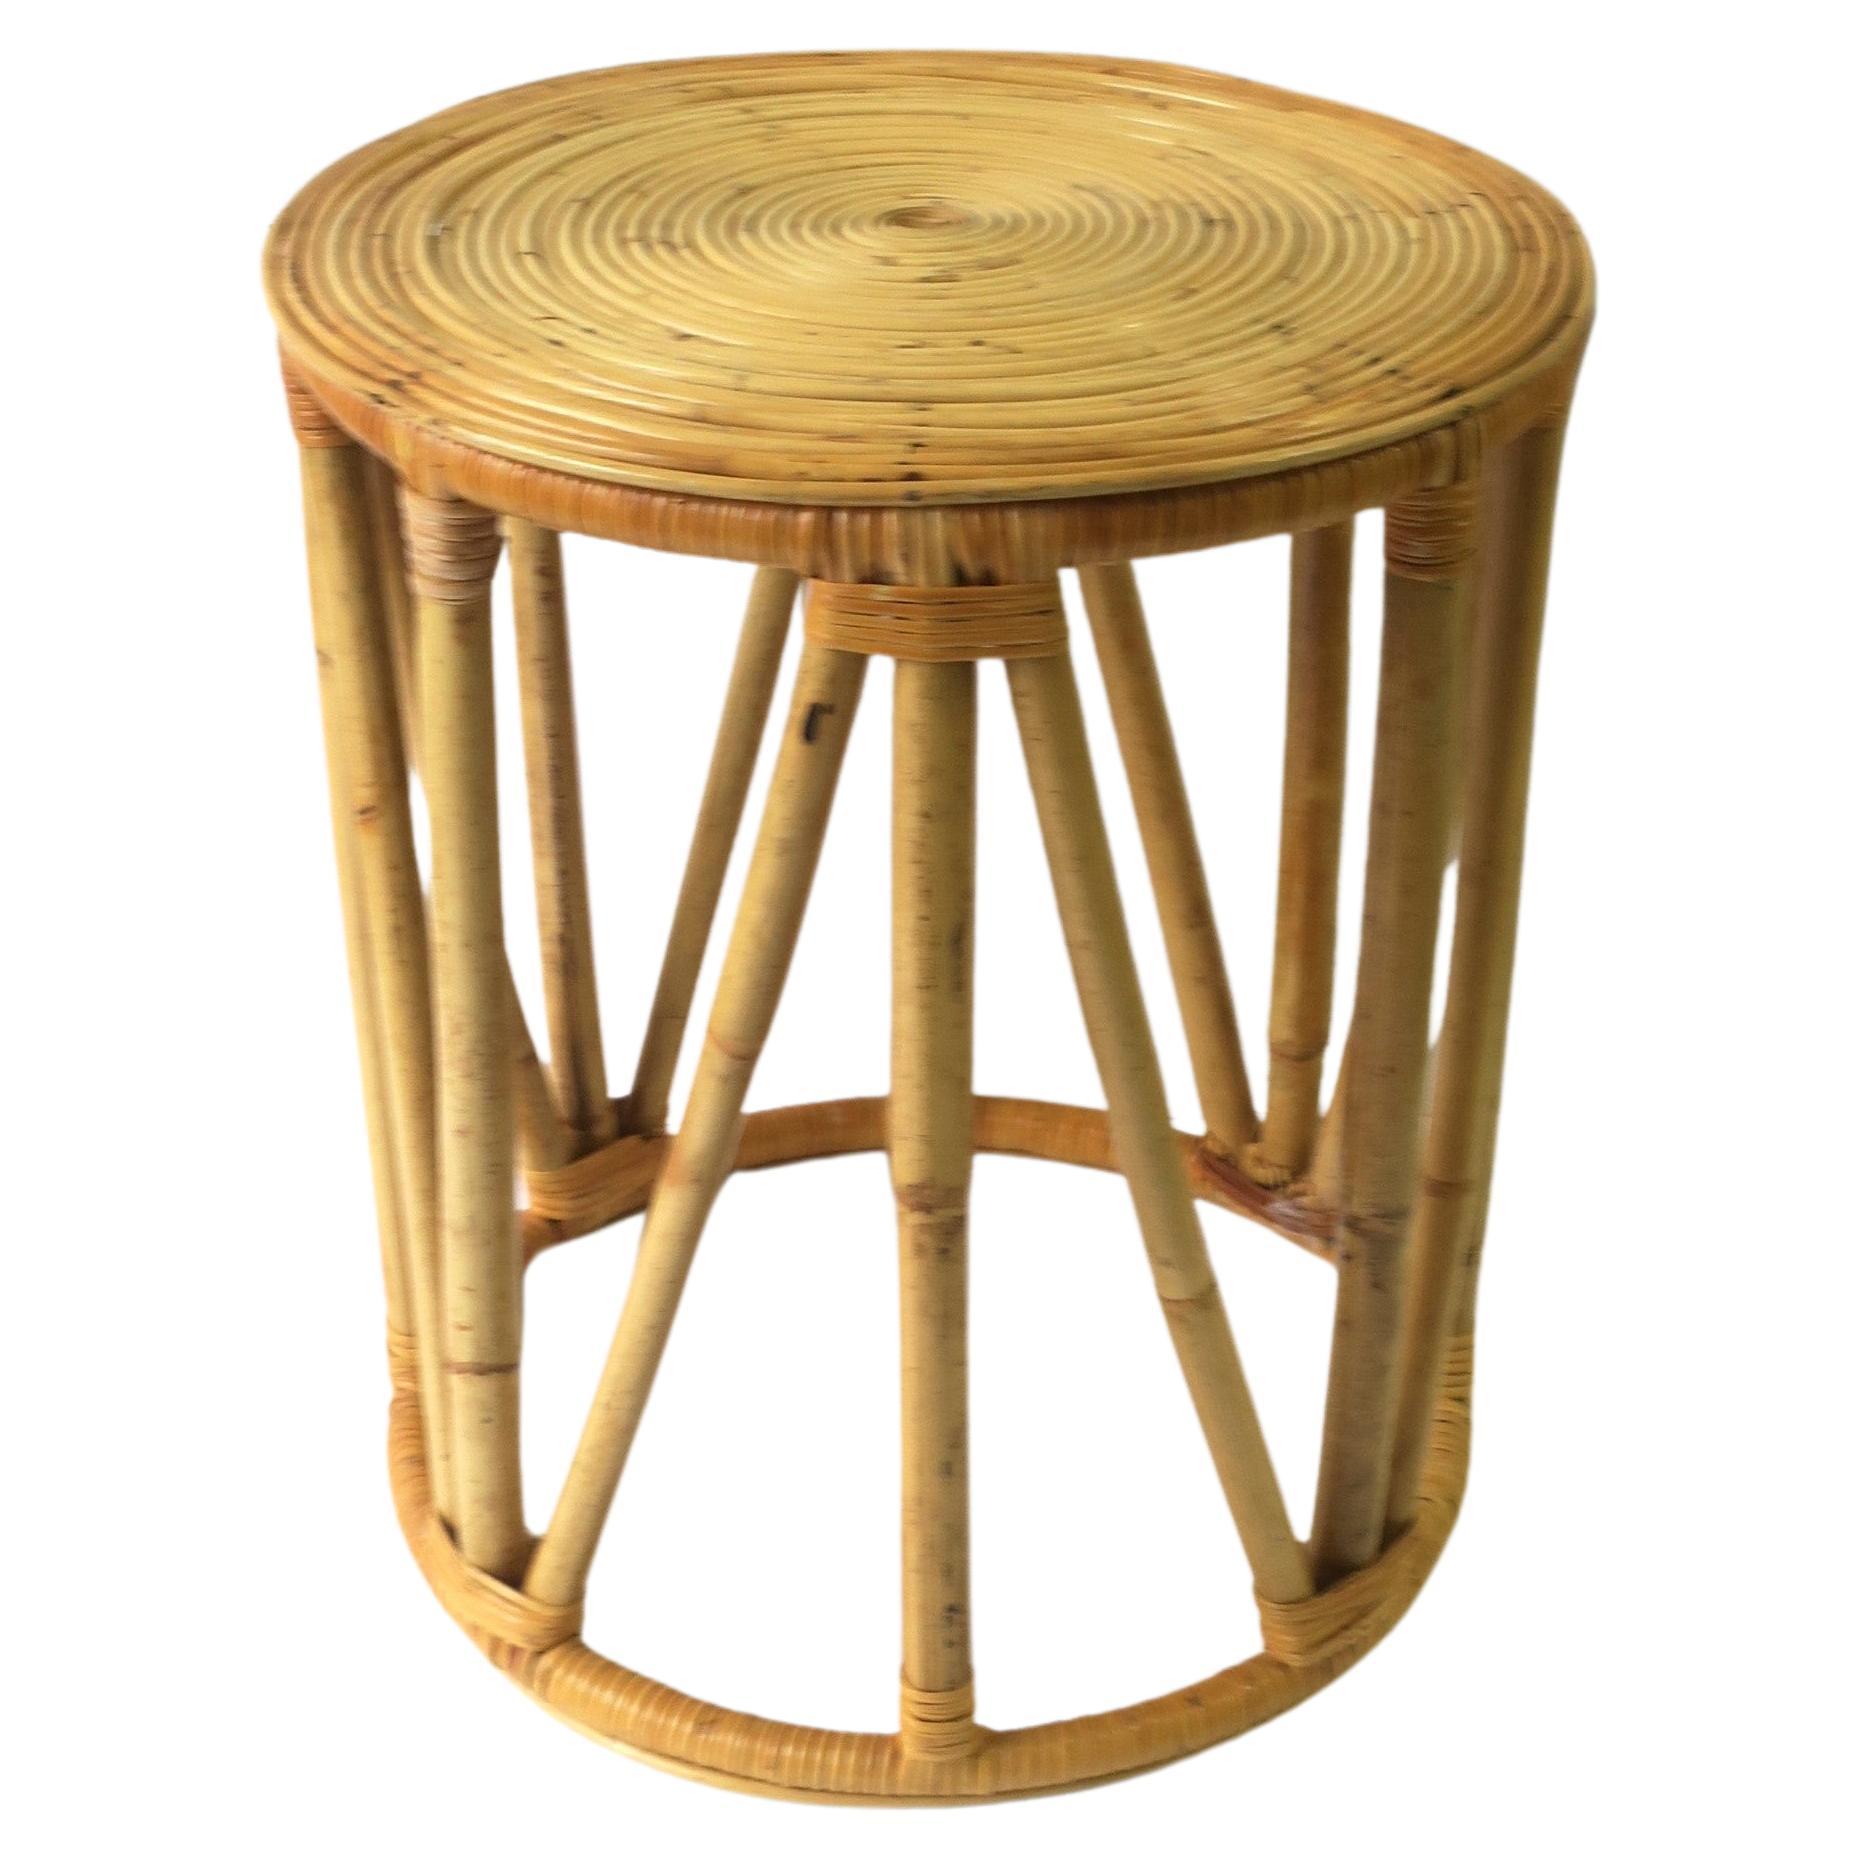 Wicker Bamboo Side Drinks Table or Stool